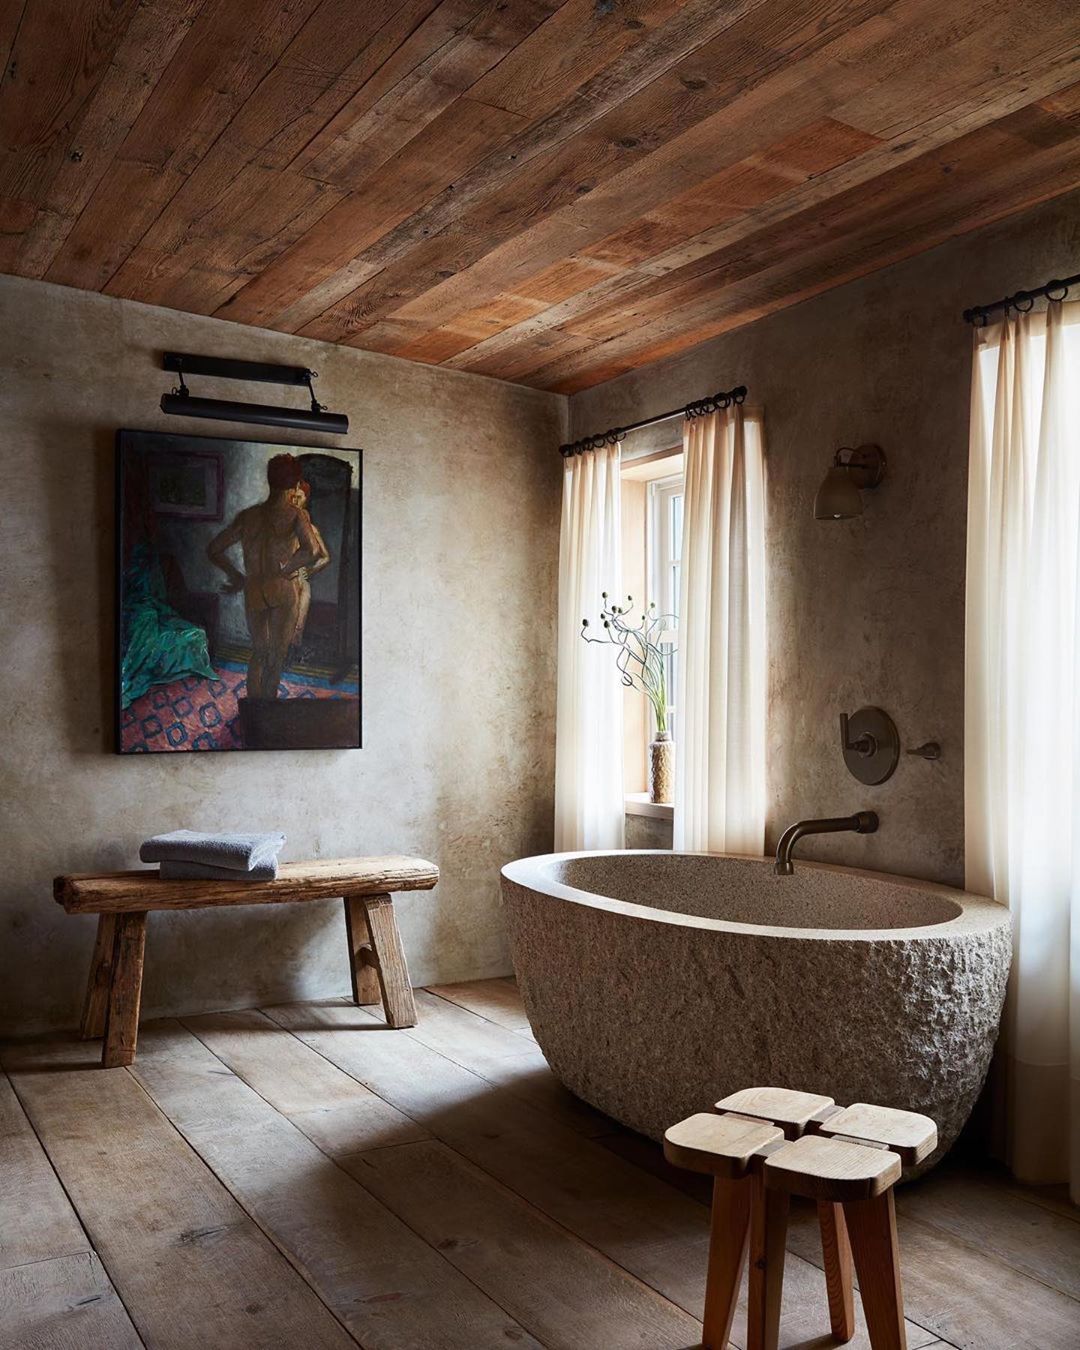 Rustic Elegance with Artistic Flair